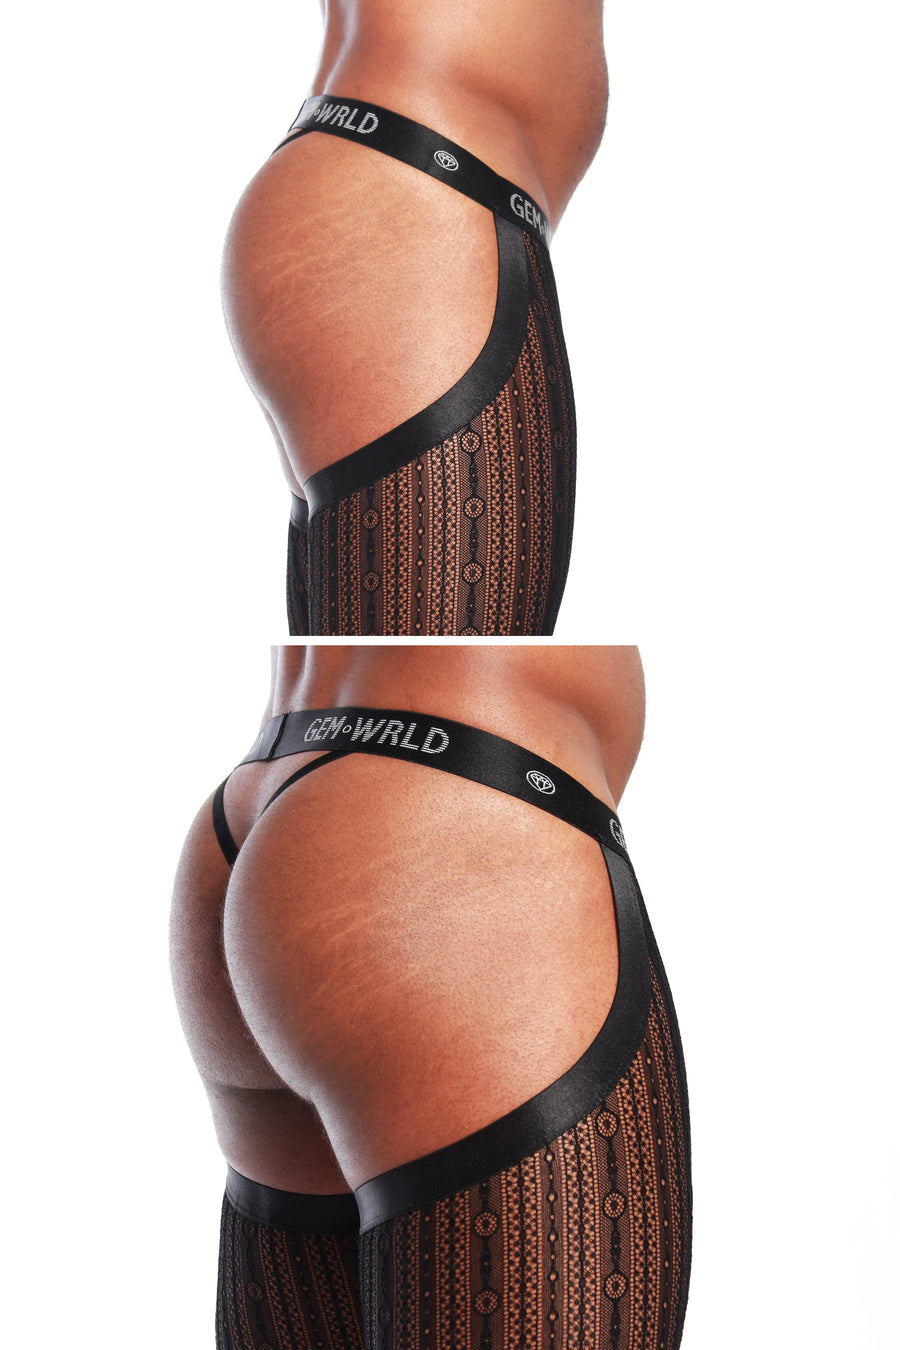 Embroidered Lace with Strappy Thong